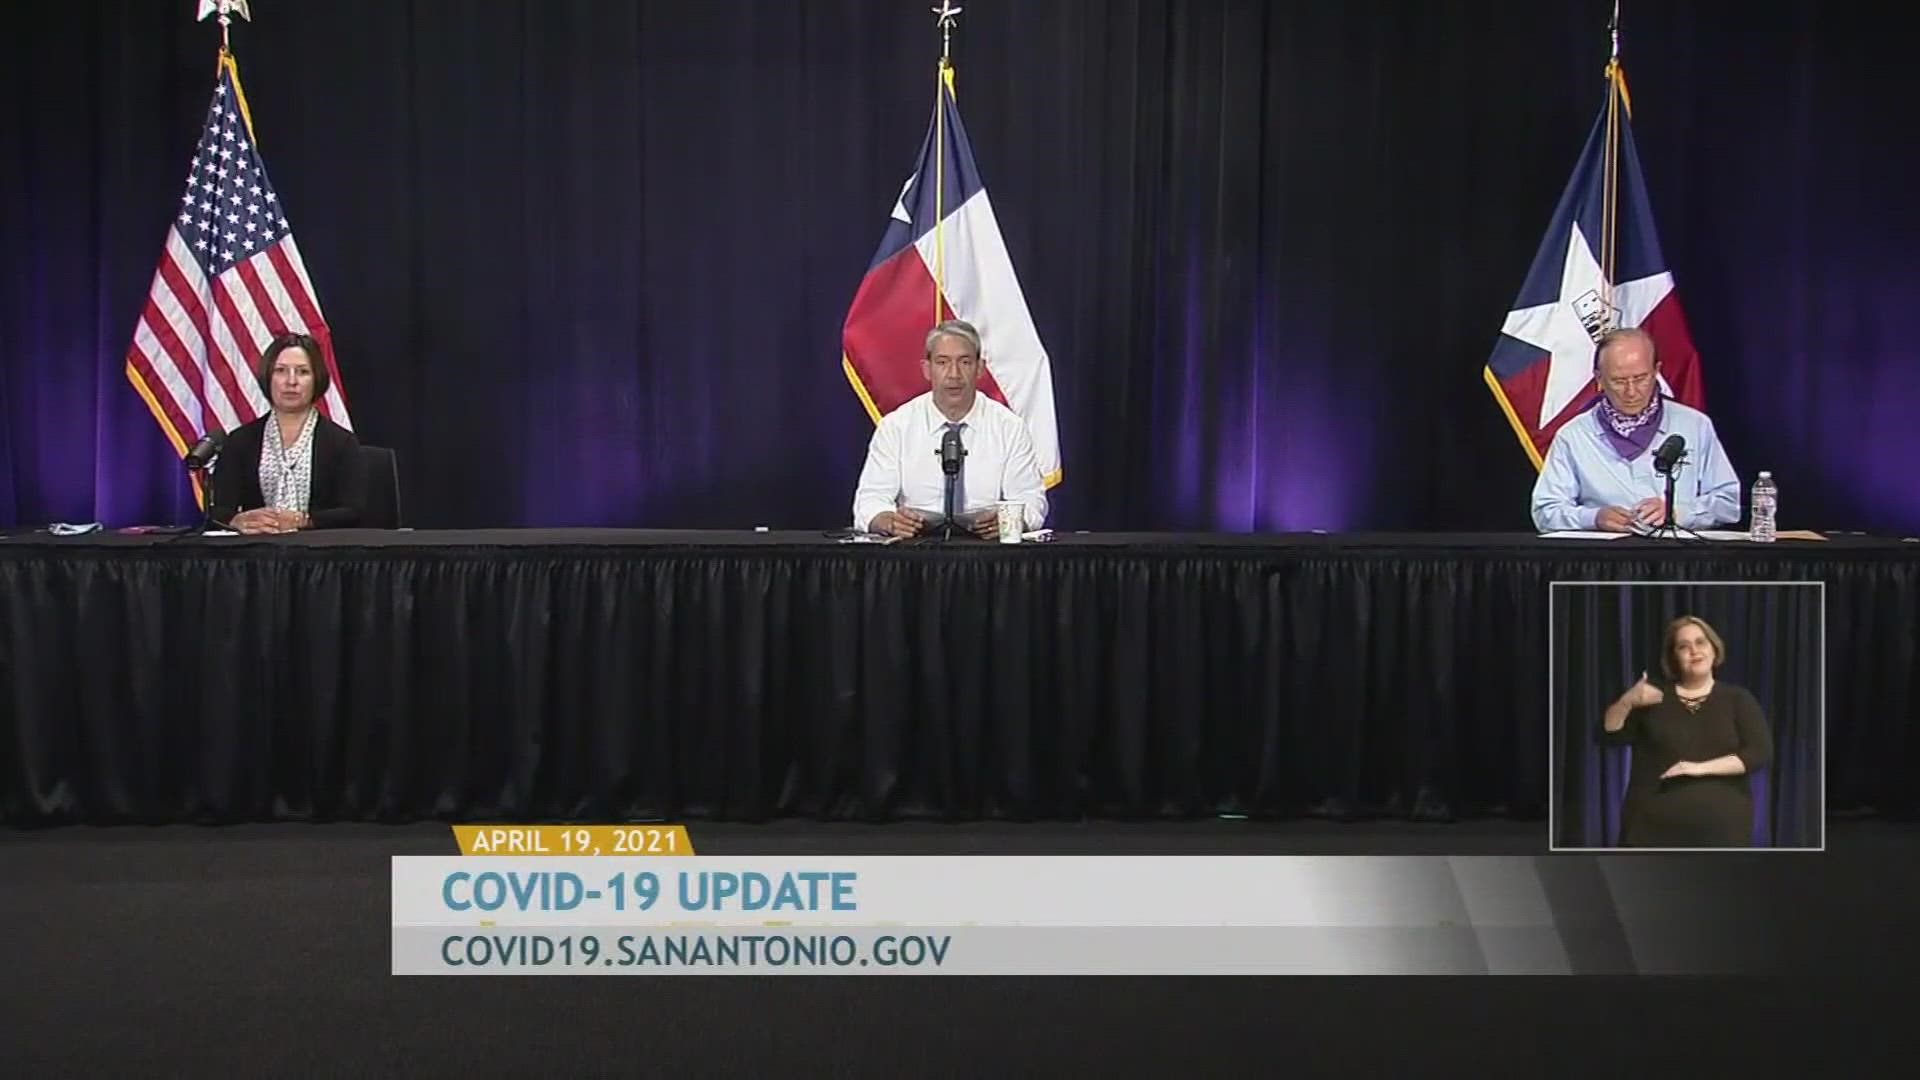 San Antonio Mayor Ron Nirenberg said vaccination efforts in Bexar County were outpacing state and national levels.